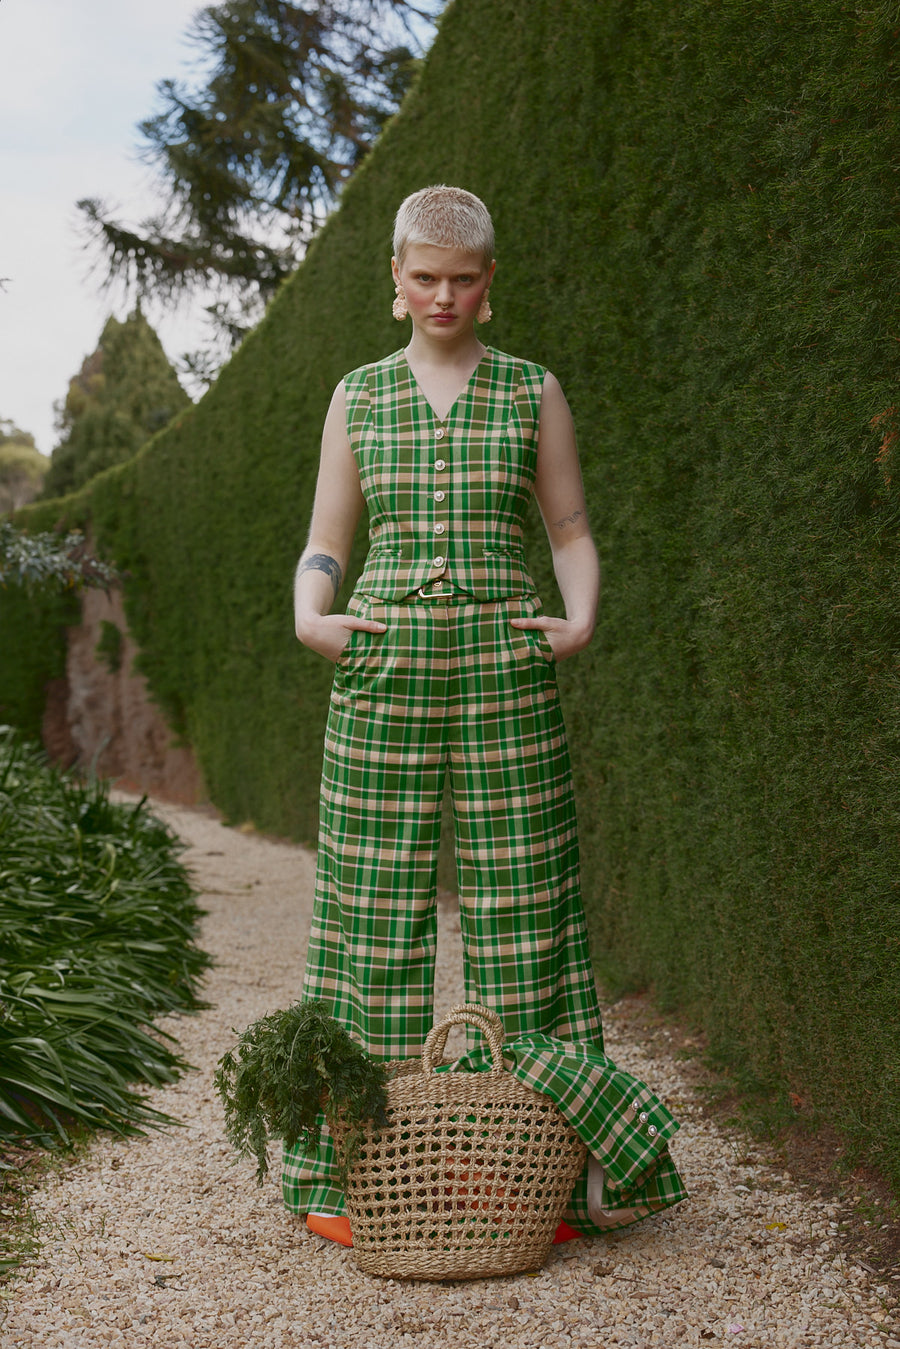 House of Campbell's In Perpetuity Spring Summer Campaign featuring the Verdant Tailored Vest.